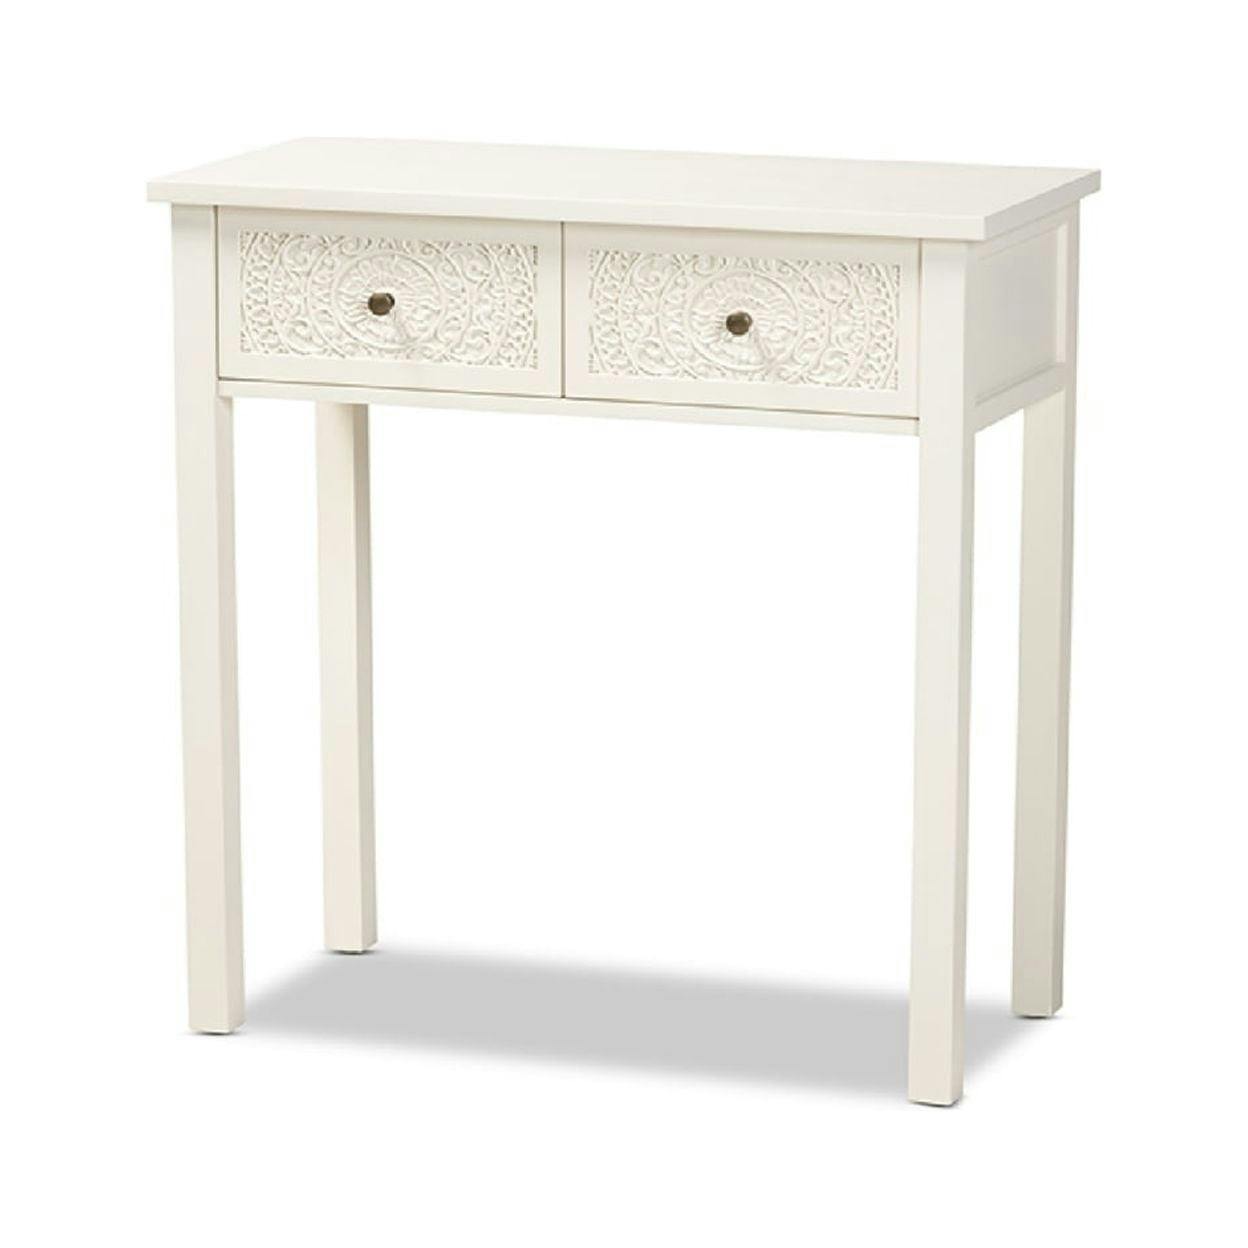 Lambert Classic White Firwood 2-Drawer Console Table